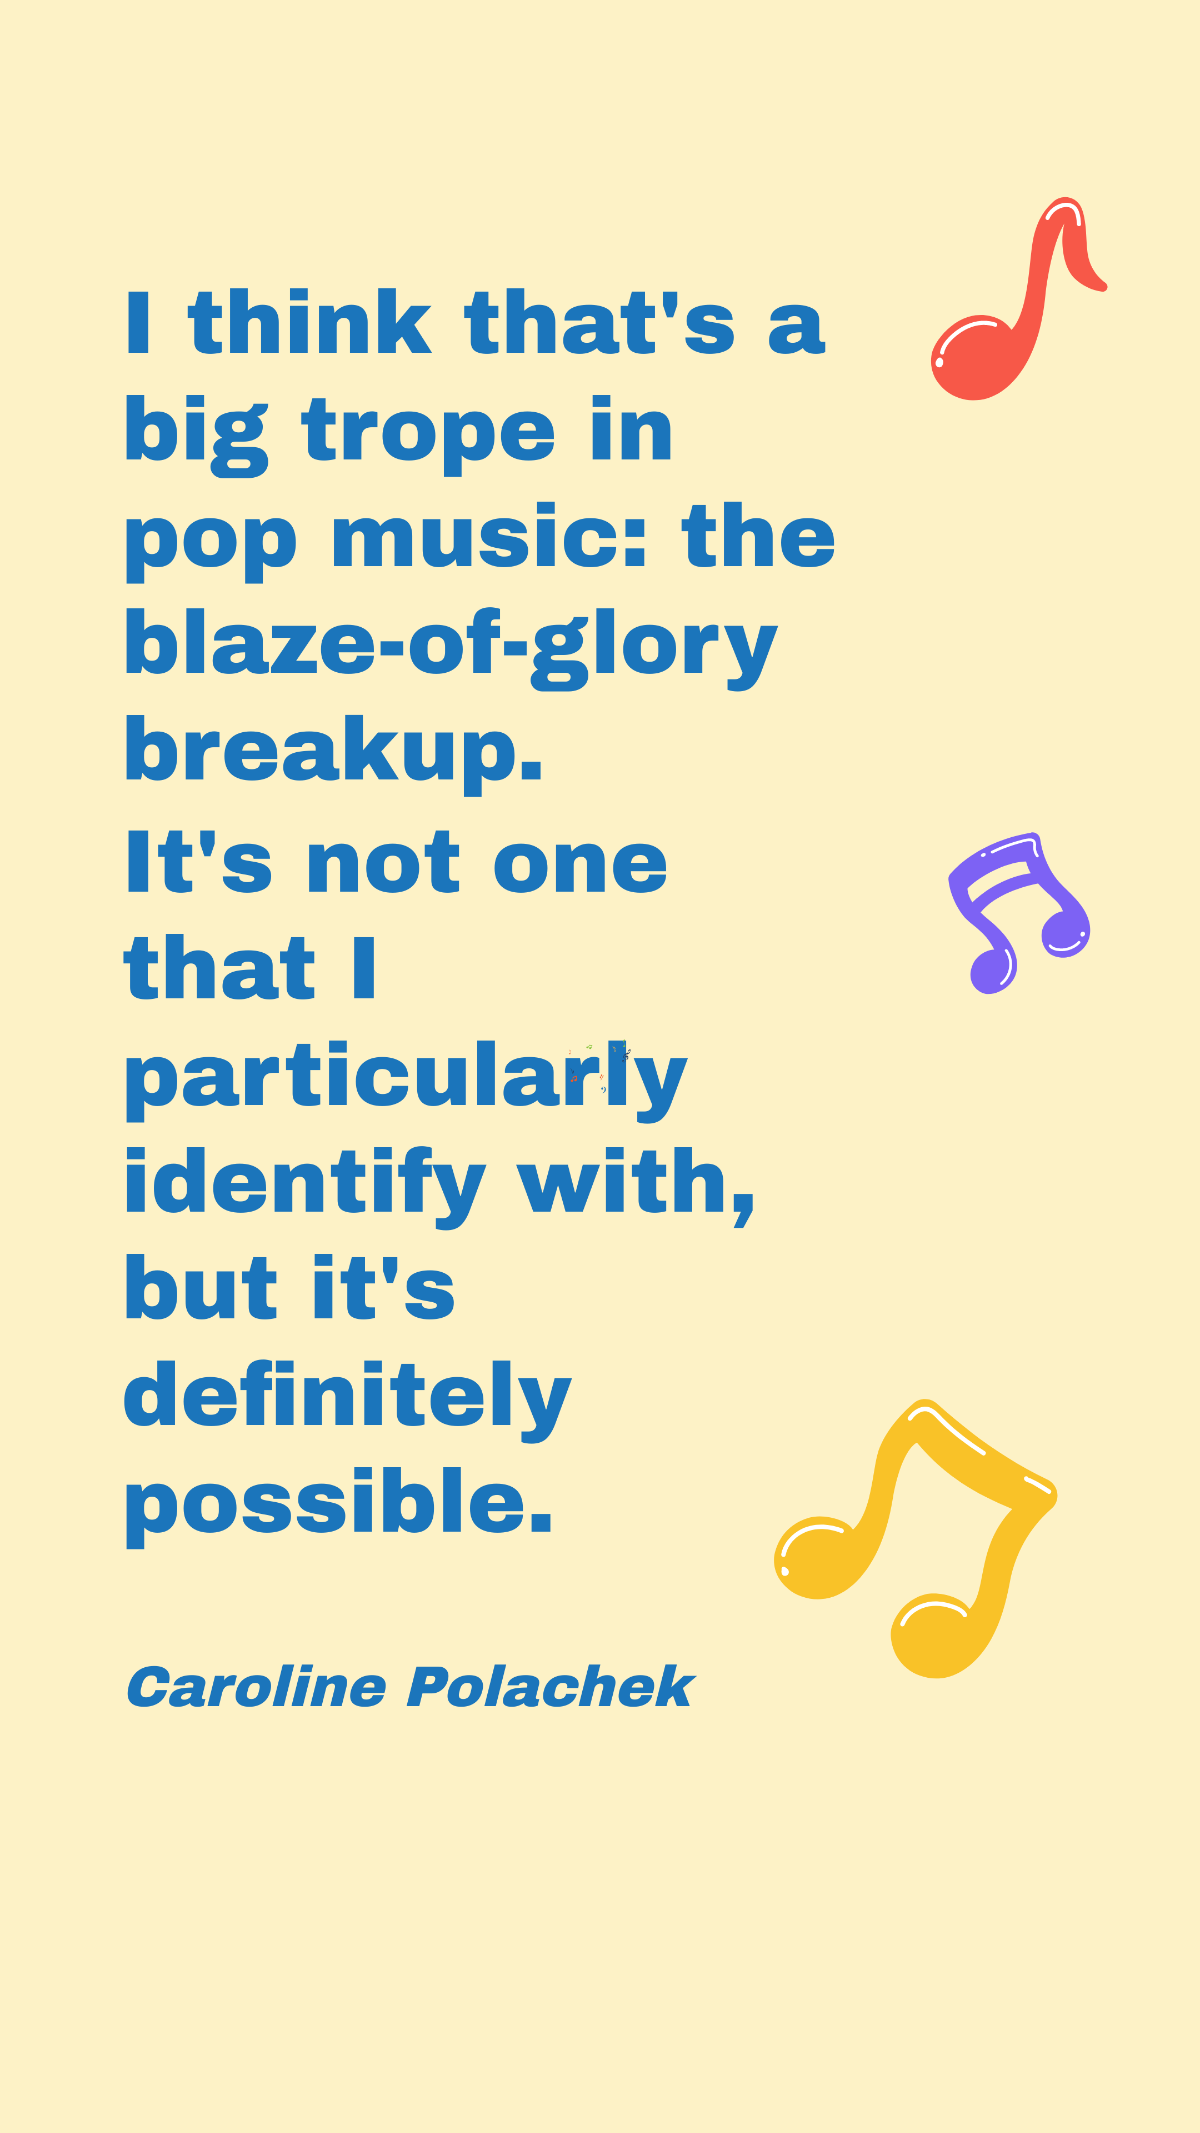 Free Caroline Polachek - I think that's a big trope in pop music: the blaze-of-glory breakup. It's not one that I particularly identify with, but it's definitely possible. Template